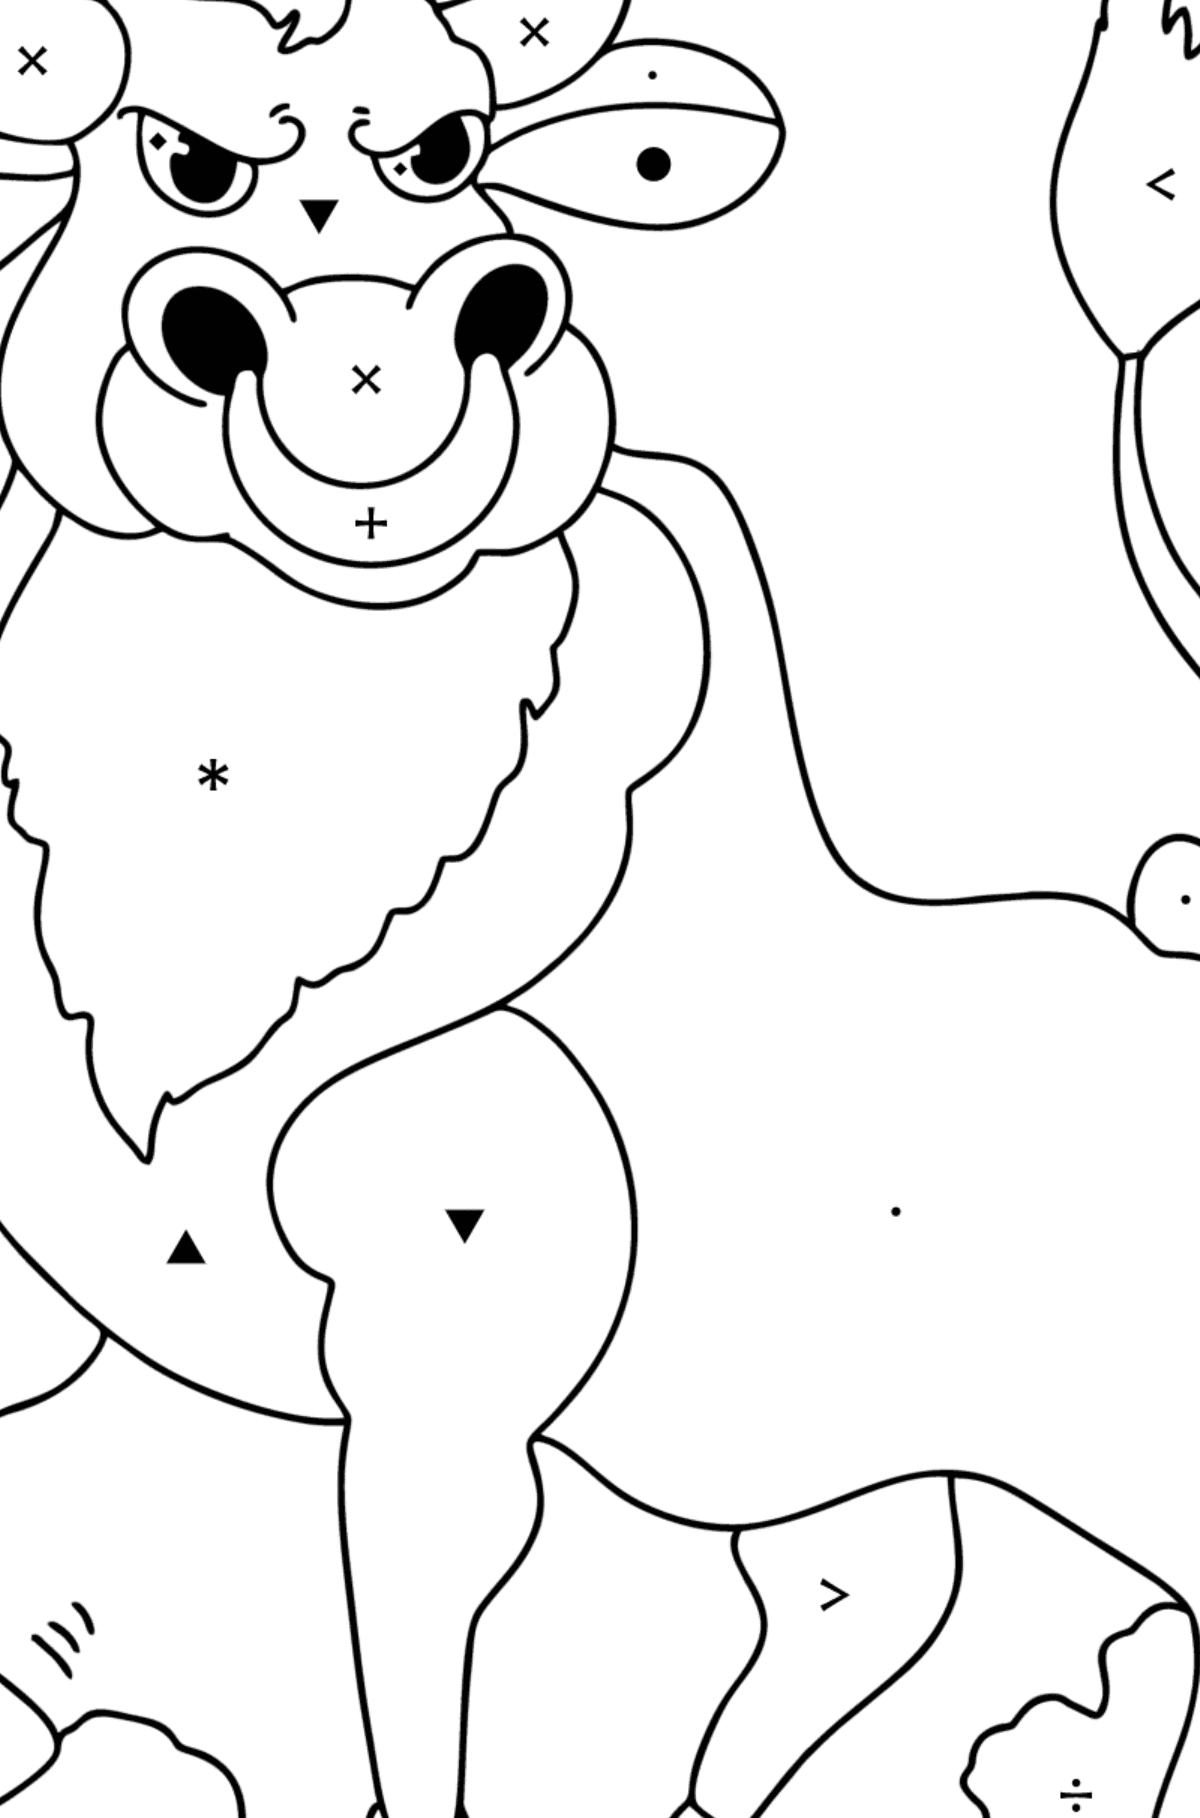 Brave bull Coloring page - Coloring by Symbols for Kids